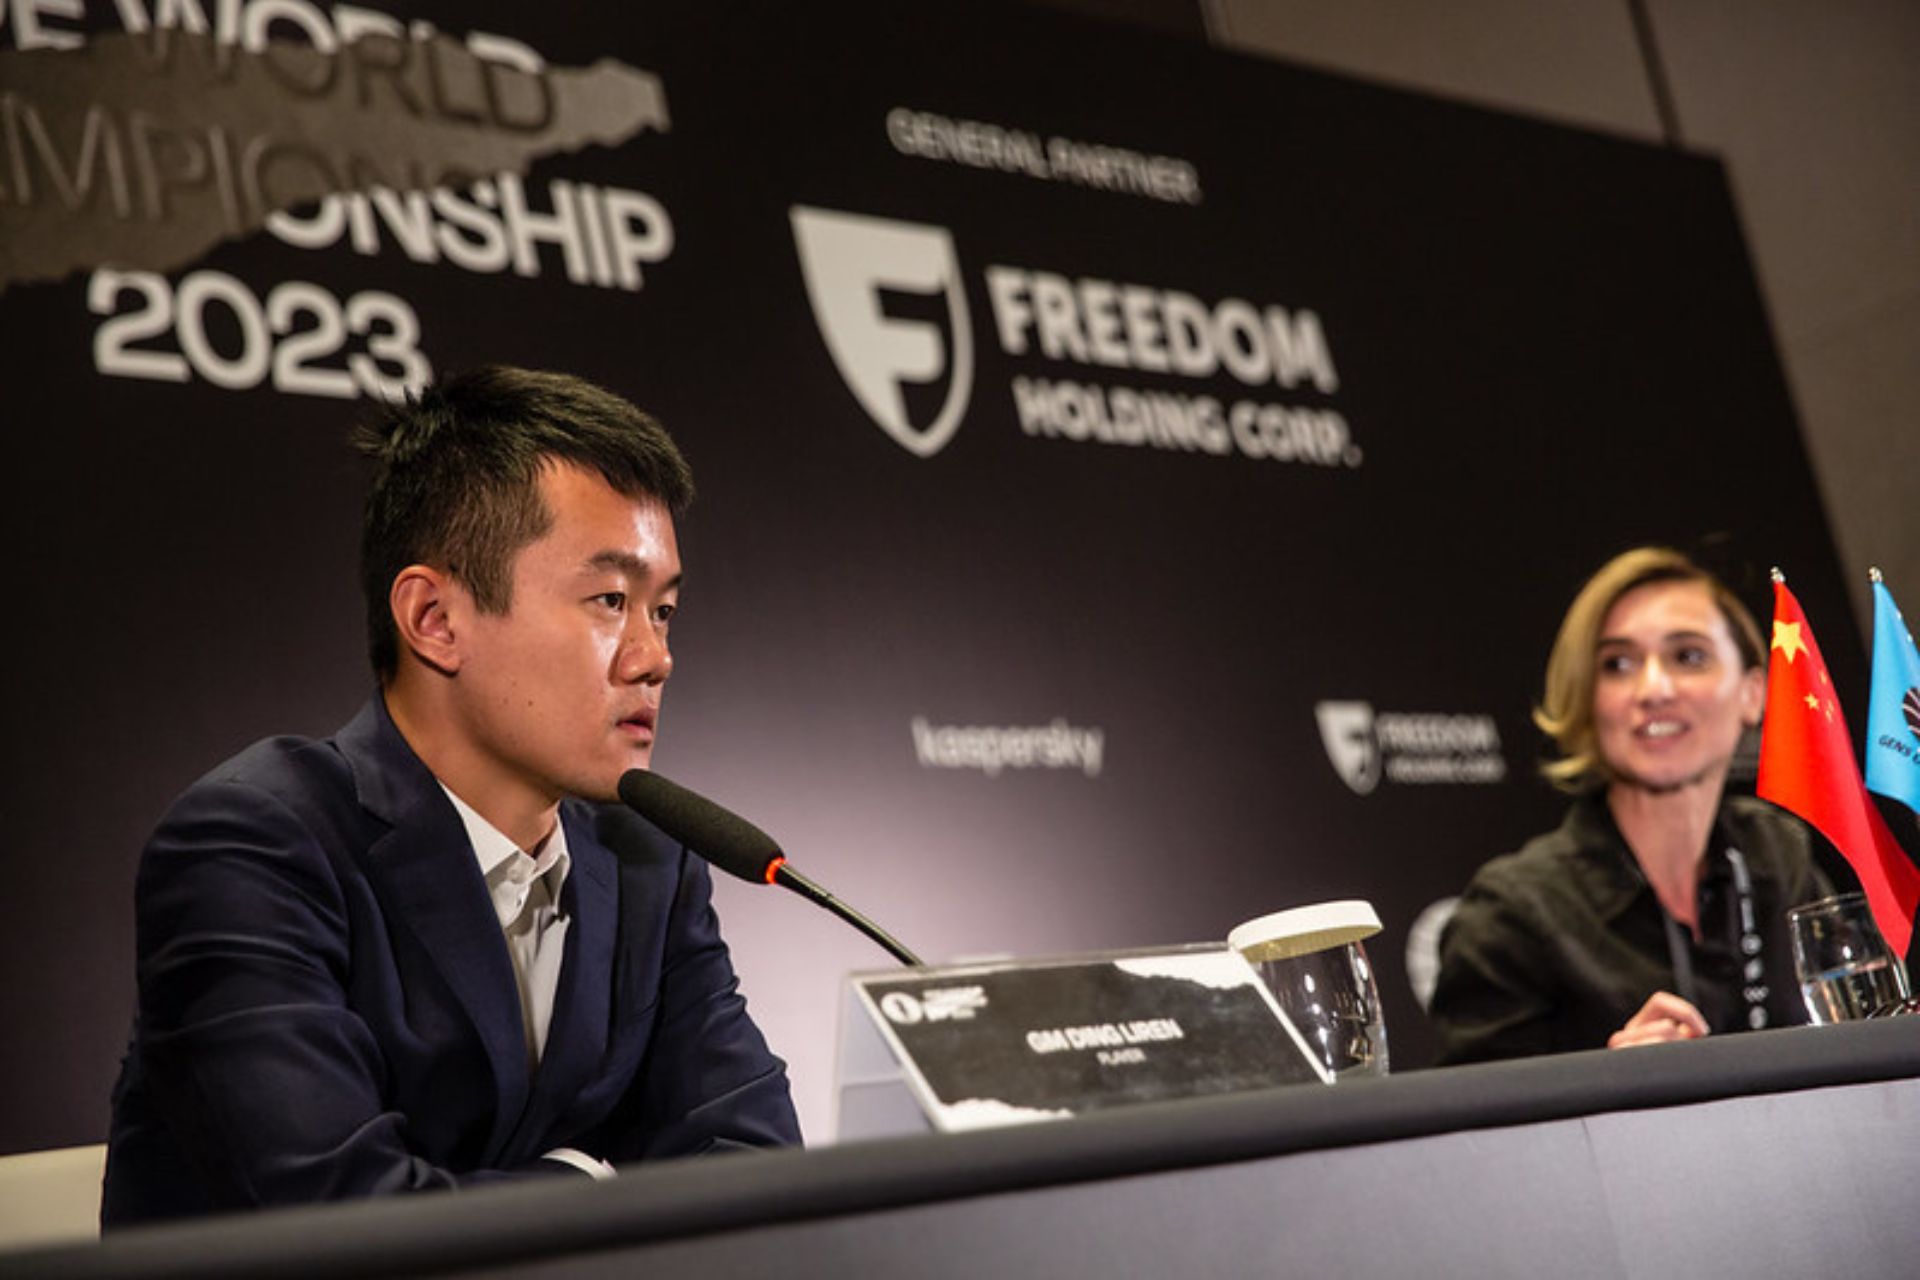 Ding Liren becomes the 17th World Chess Champion